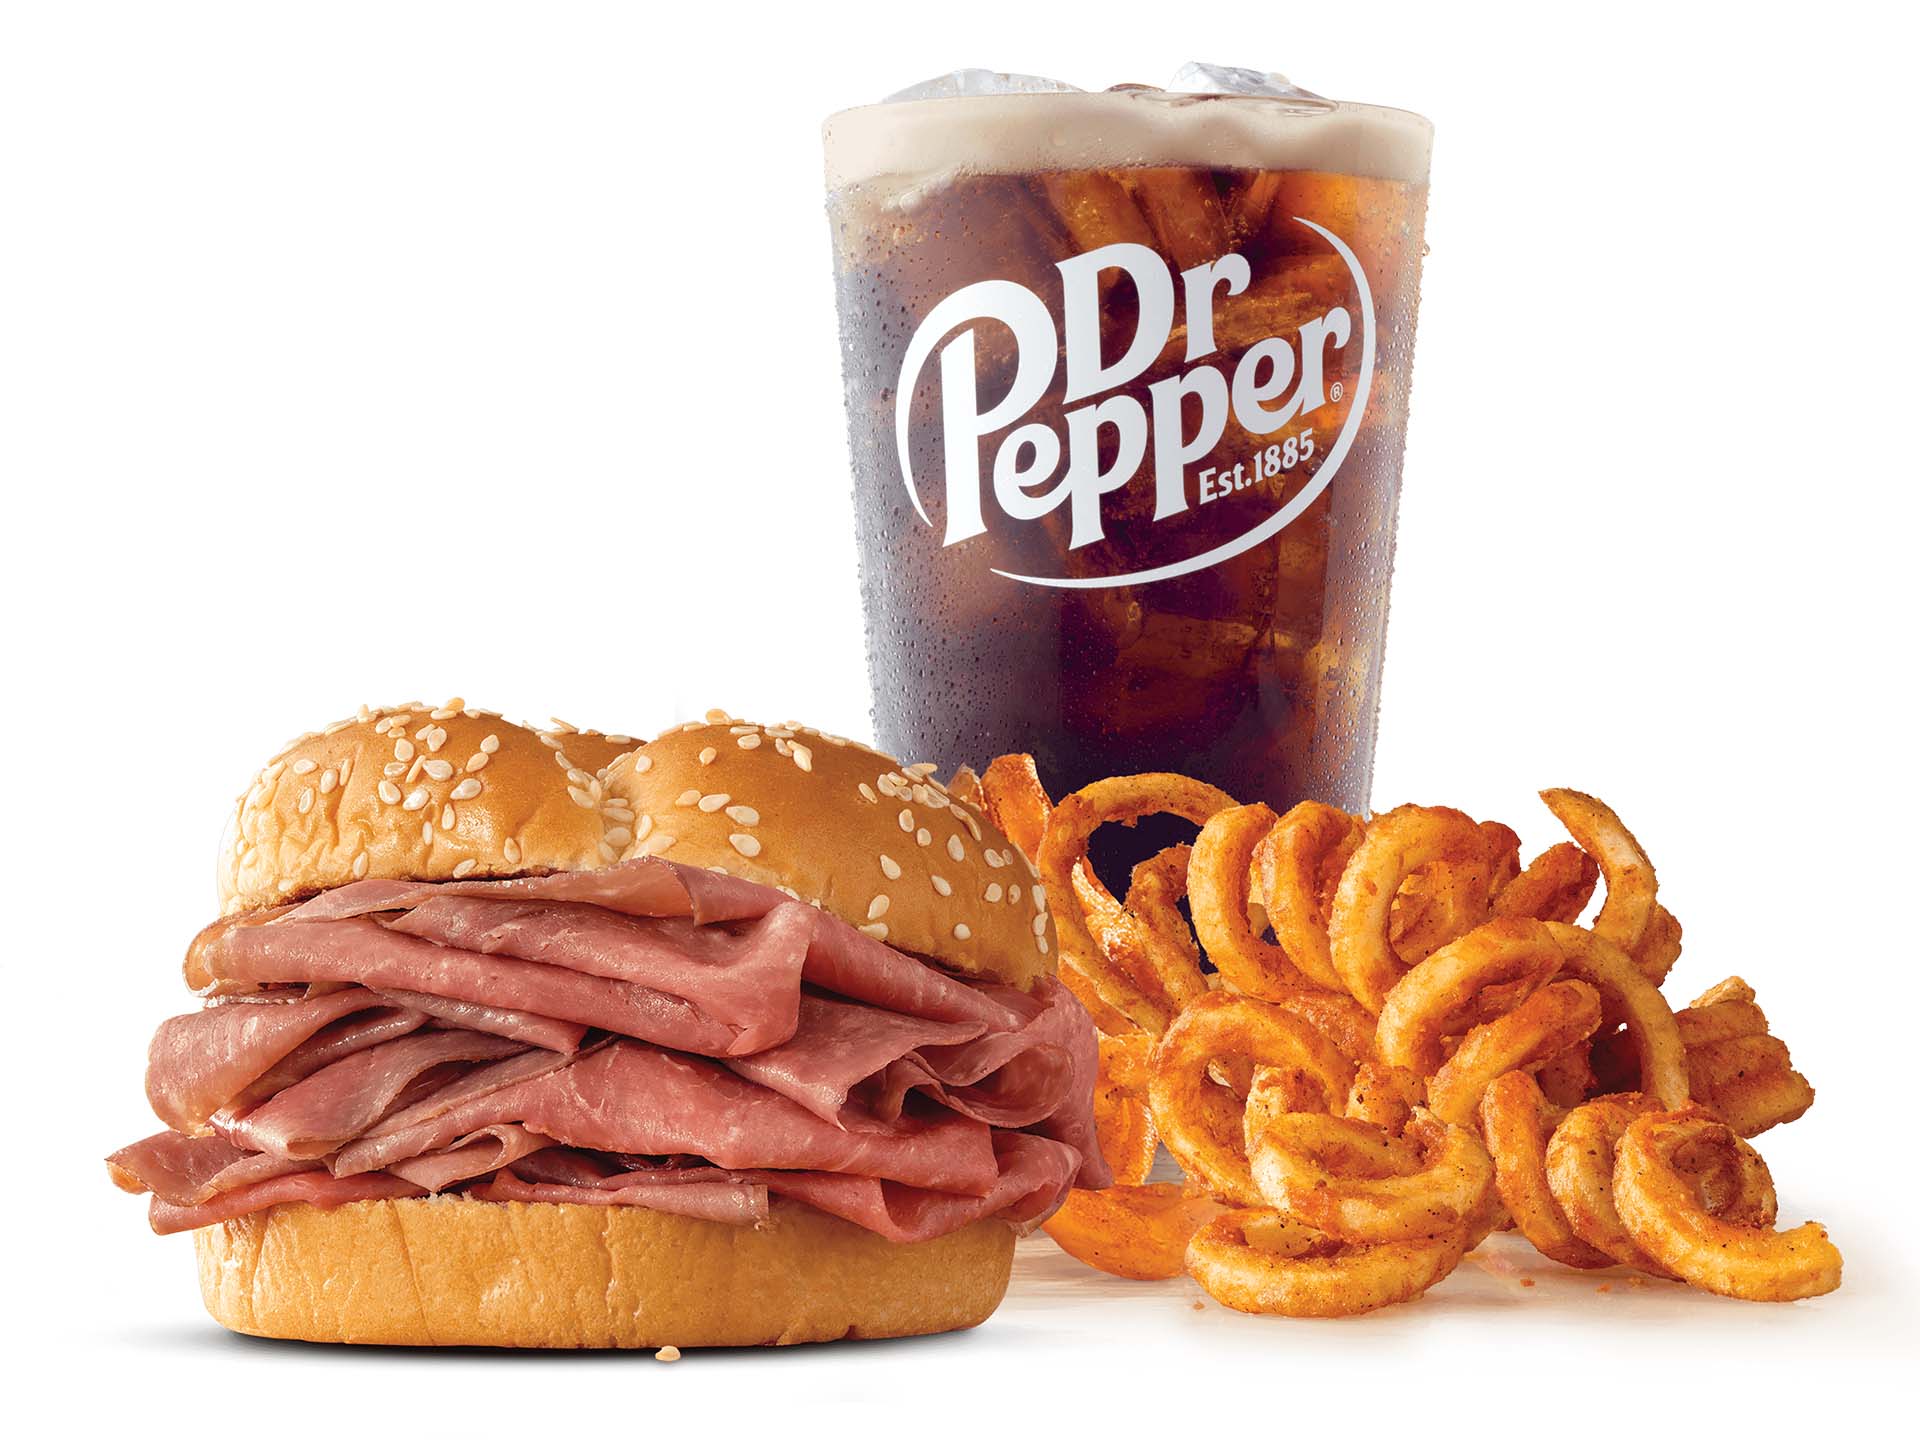 Arby's classic roast beef meal in Plainfield, NJ